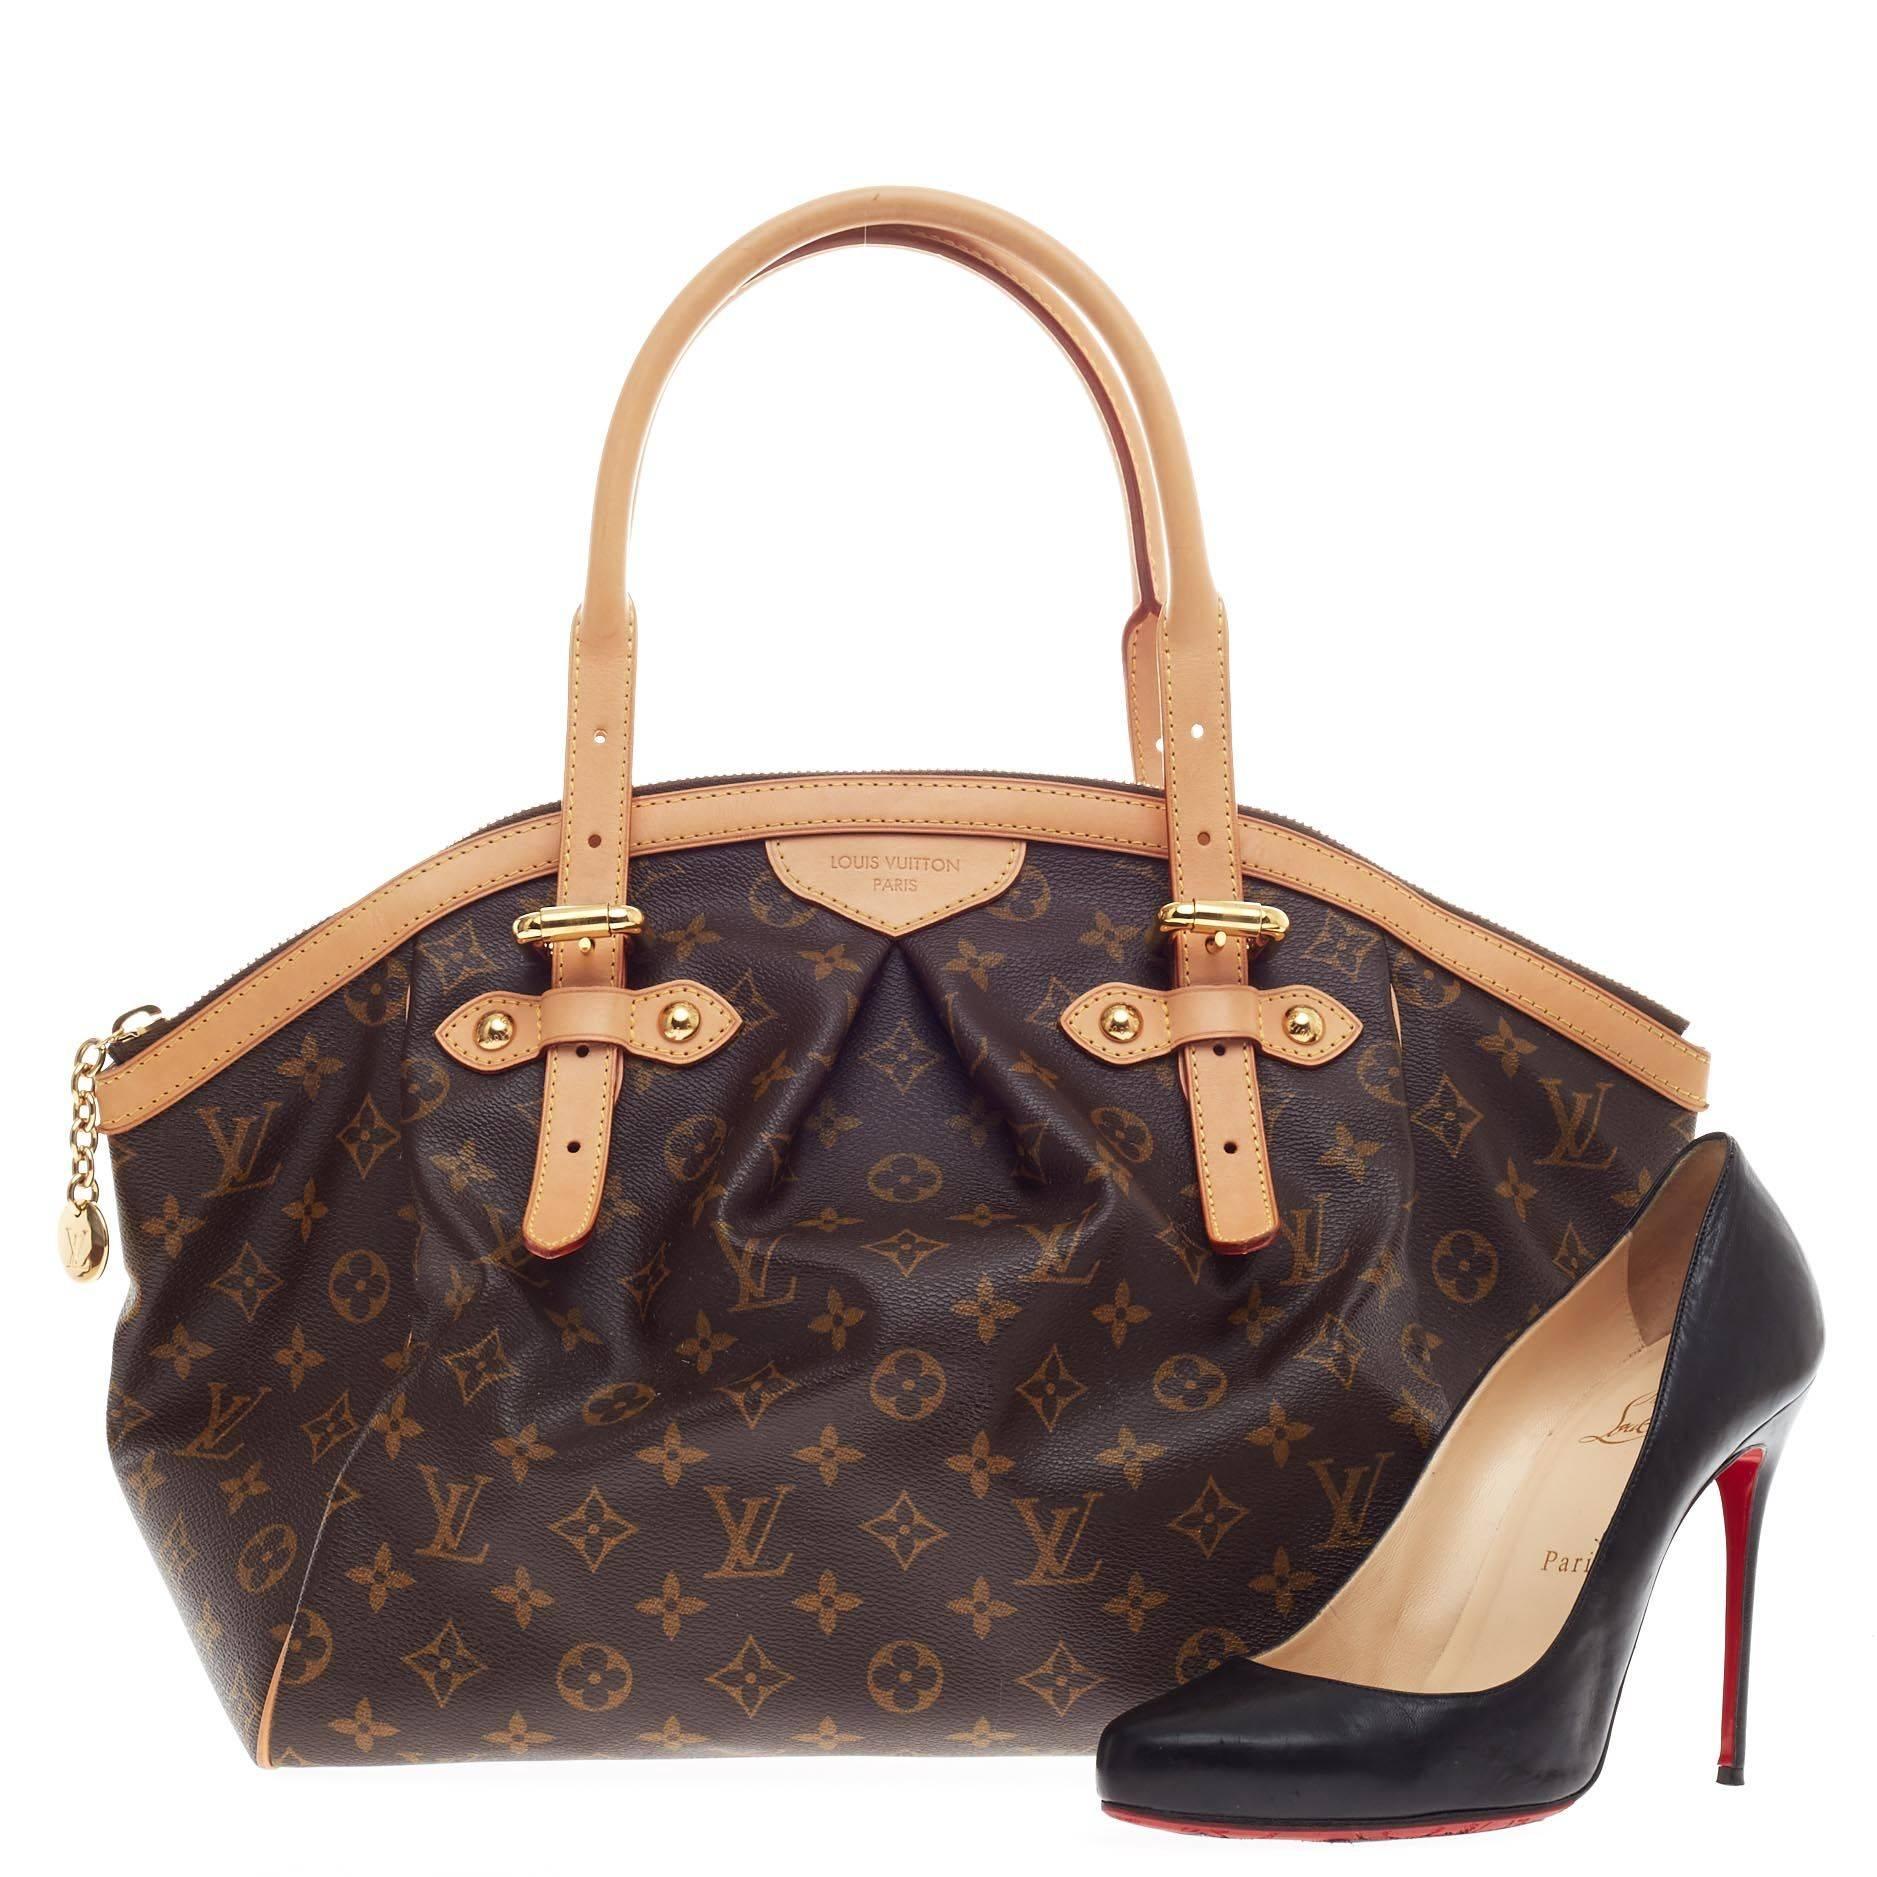 This authentic Louis Vuitton Tivoli Monogram Canvas GM inspired by the Italian city itself combines chic and feminine luxury for everyday use. Crafted from iconic monogram canvas print, this bag features inverted pleating at the front, dual-rolled